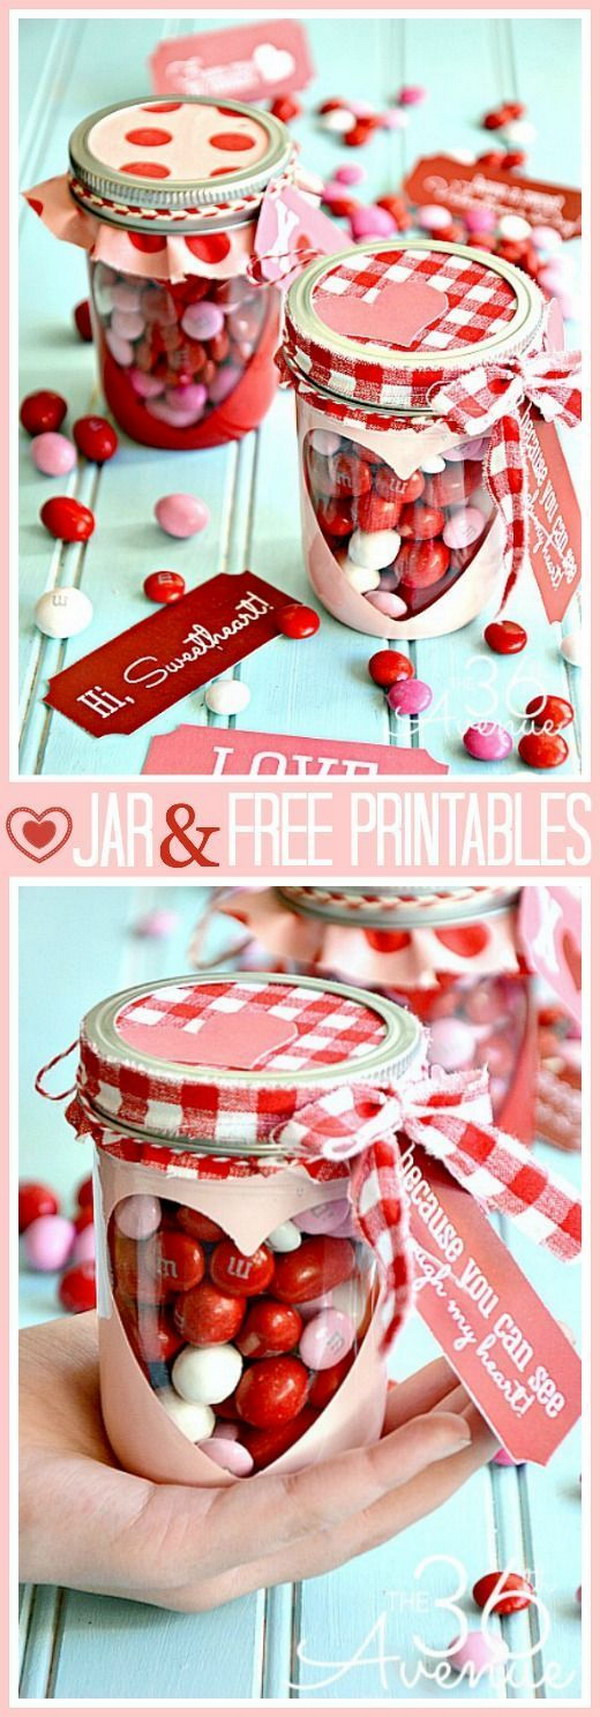 Valentine Candy Gift Ideas
 70 DIY Valentine s Day Gifts & Decorations Made From Mason